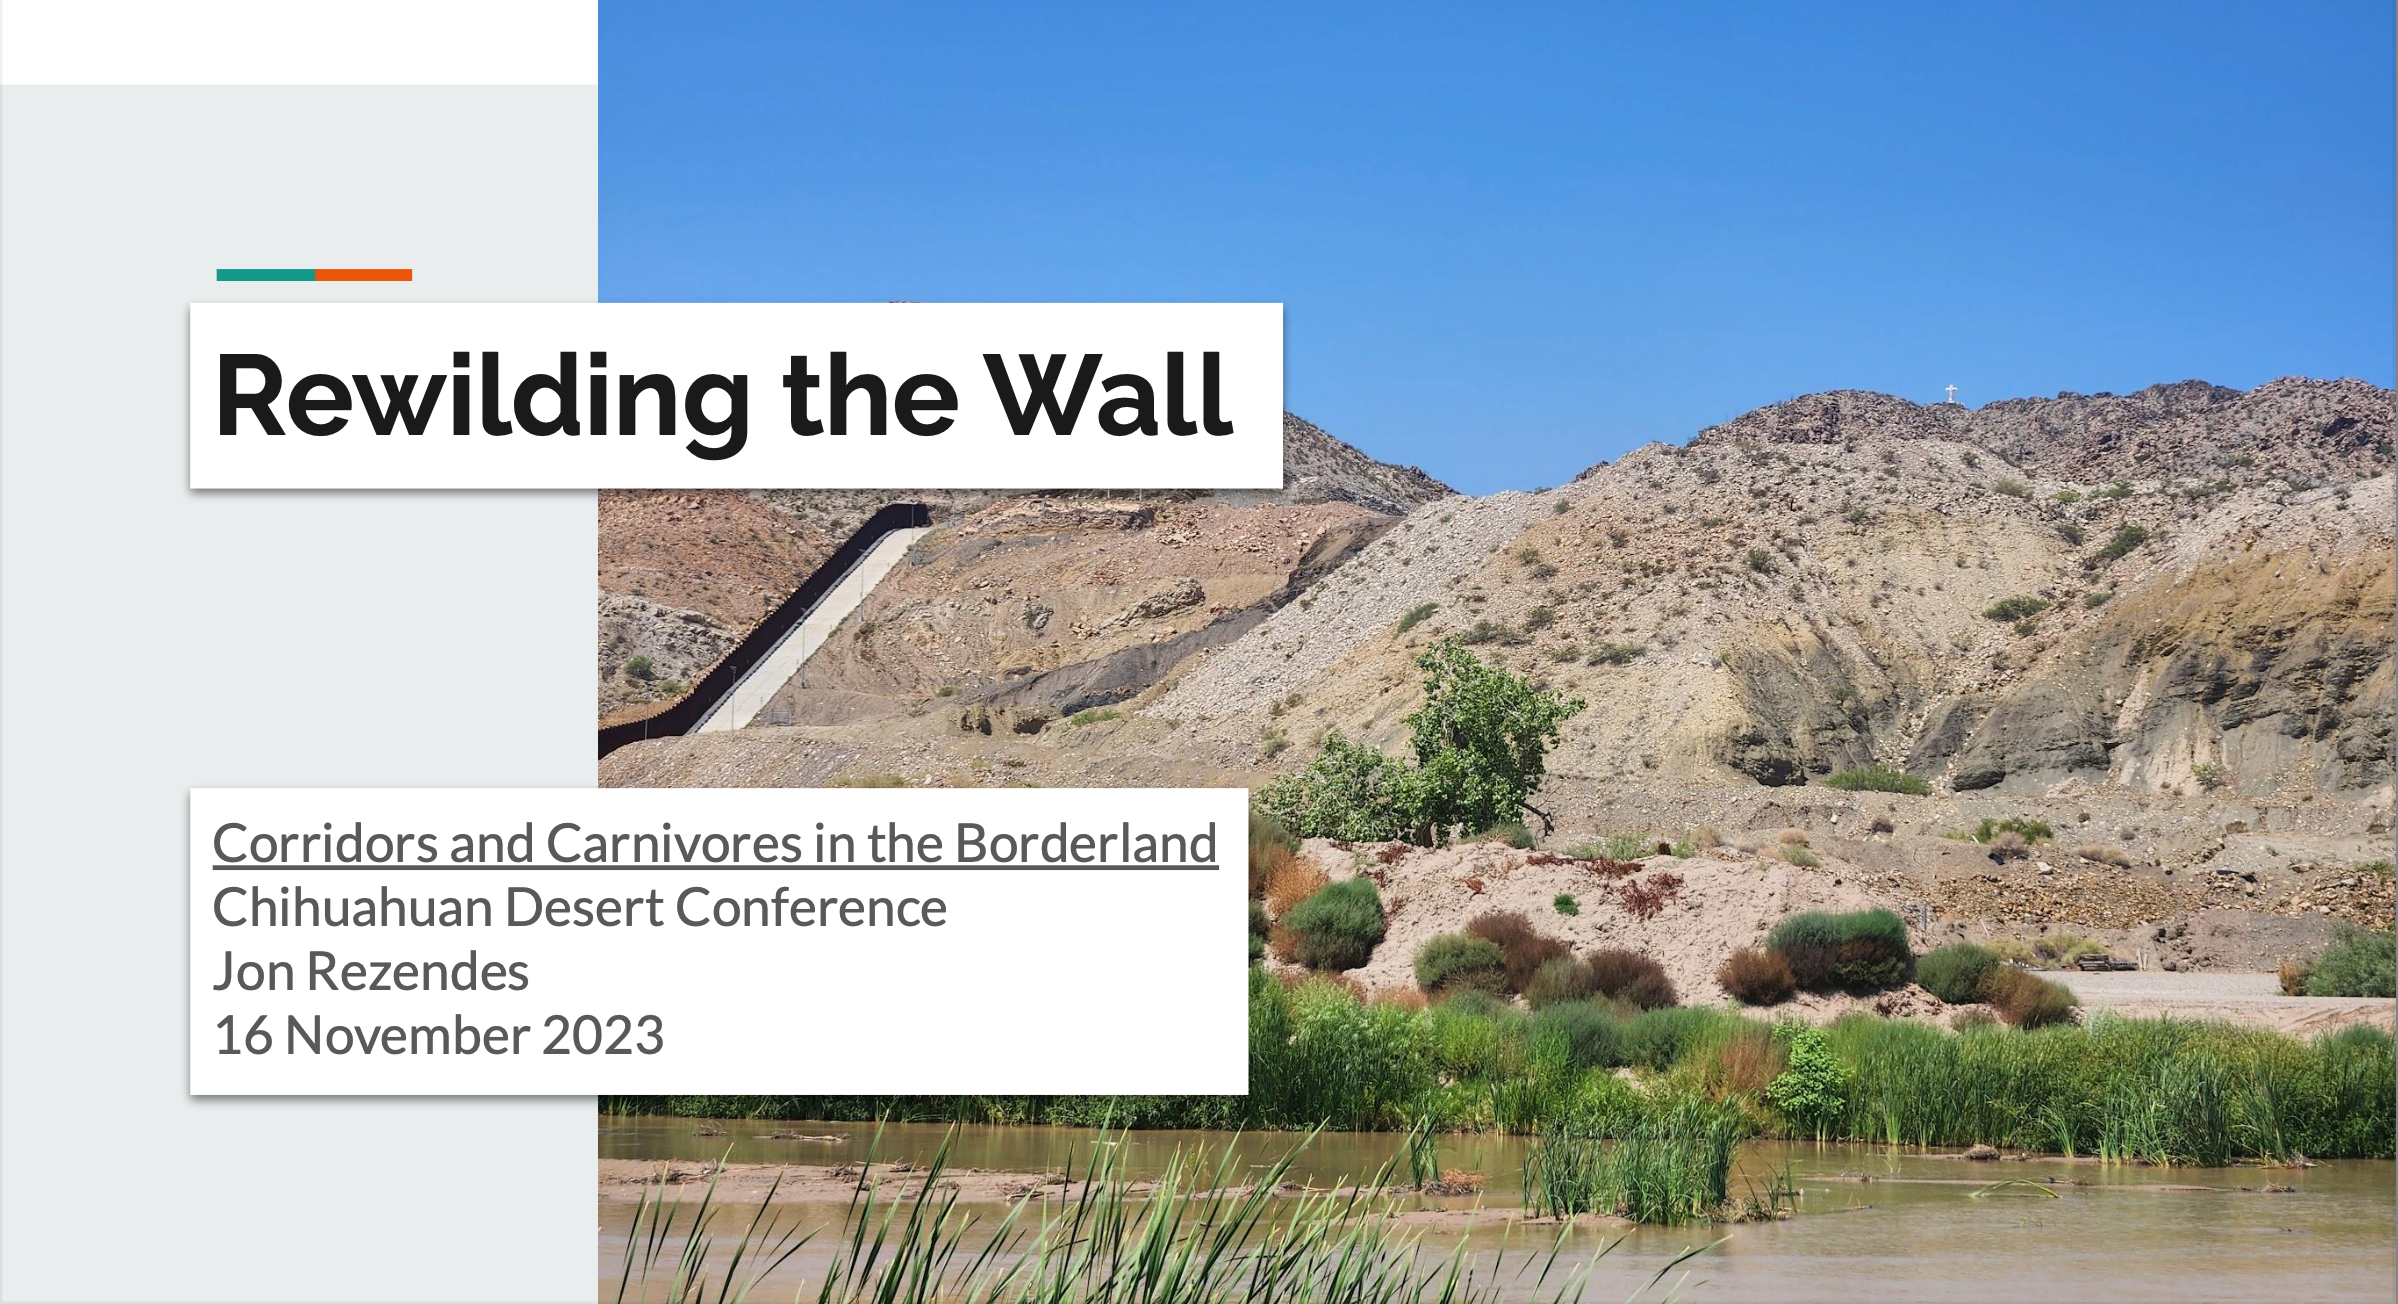 Rewilding the Wall - Jon Rezendes - Presentation at the Chihuahuan Desert Conference, November 16, 2023